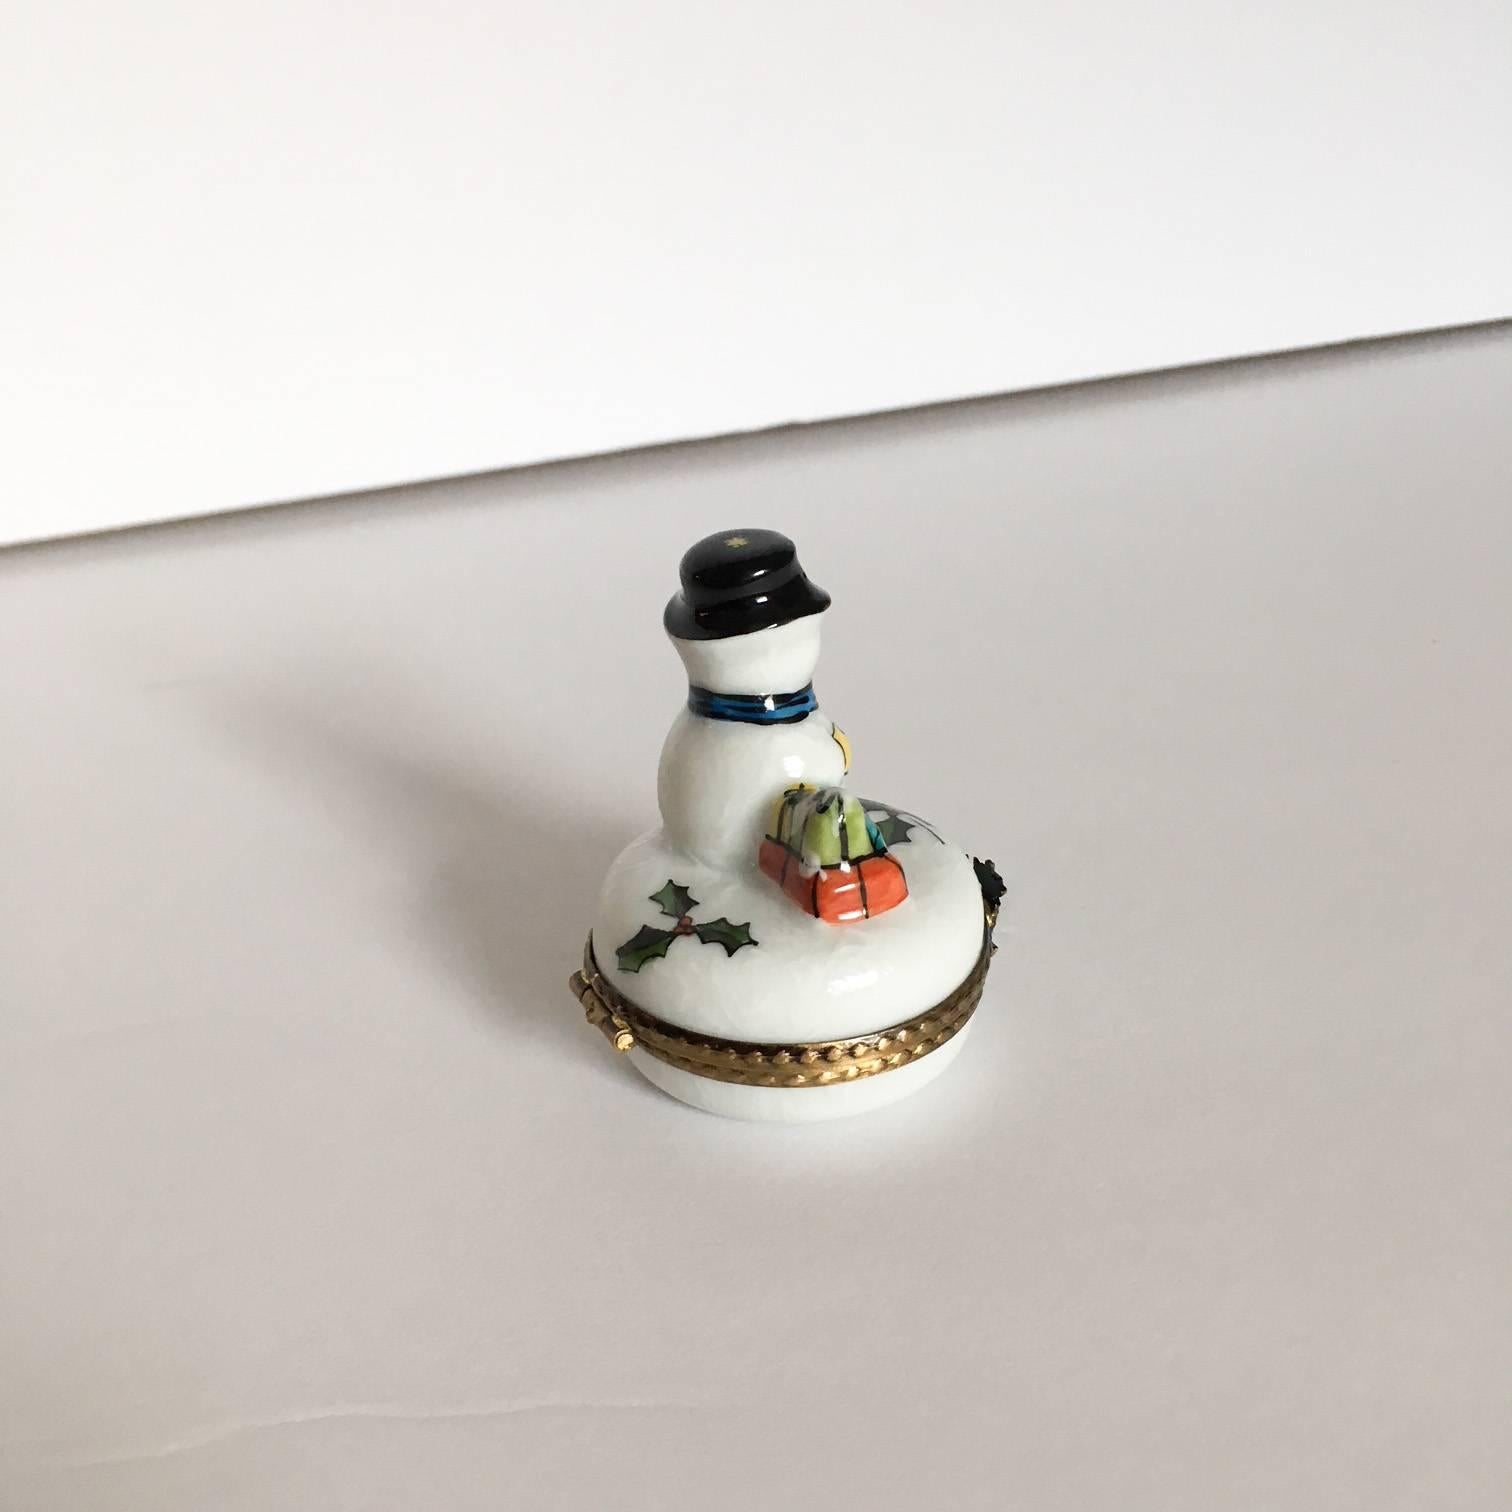 Delightful French Limoges box with brass hardware, hand-painted in France by Peint Main. Decorated with a snowman figure on the top, the clasp has a reindeer decoration with a hand-painted interior holly branch sprig on the inside bottom of the